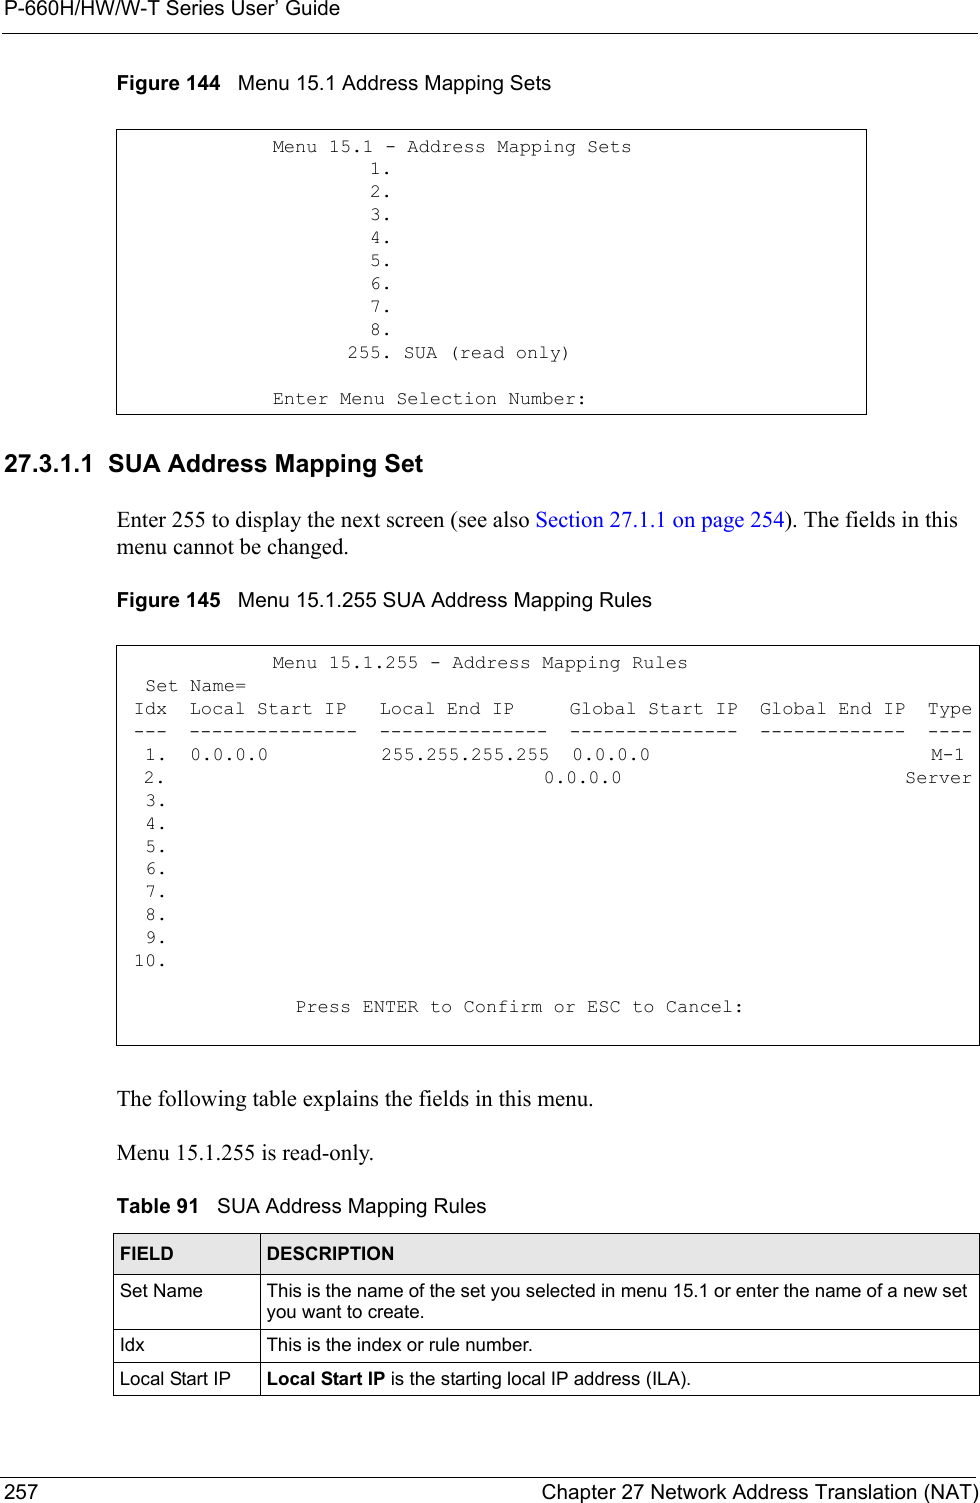 P-660H/HW/W-T Series User’ Guide257 Chapter 27 Network Address Translation (NAT)Figure 144   Menu 15.1 Address Mapping Sets27.3.1.1  SUA Address Mapping SetEnter 255 to display the next screen (see also Section 27.1.1 on page 254). The fields in this menu cannot be changed. Figure 145   Menu 15.1.255 SUA Address Mapping RulesThe following table explains the fields in this menu. Menu 15.1.255 is read-only. Menu 15.1 - Address Mapping Sets                      1.                      2.                      3.                      4.                      5.                      6.                      7.                      8.                    255. SUA (read only)Enter Menu Selection Number:Menu 15.1.255 - Address Mapping Rules  Set Name=  Idx  Local Start IP   Local End IP     Global Start IP  Global End IP  Type ---  ---------------  ---------------  ---------------  -------------  ----  1.  0.0.0.0          255.255.255.255  0.0.0.0                         M-1  2.                                    0.0.0.0                           Server  3.  4.  5.  6.  7.  8.  9. 10.  Press ENTER to Confirm or ESC to Cancel:Table 91   SUA Address Mapping RulesFIELD DESCRIPTIONSet Name This is the name of the set you selected in menu 15.1 or enter the name of a new set you want to create.Idx This is the index or rule number.Local Start IP Local Start IP is the starting local IP address (ILA).